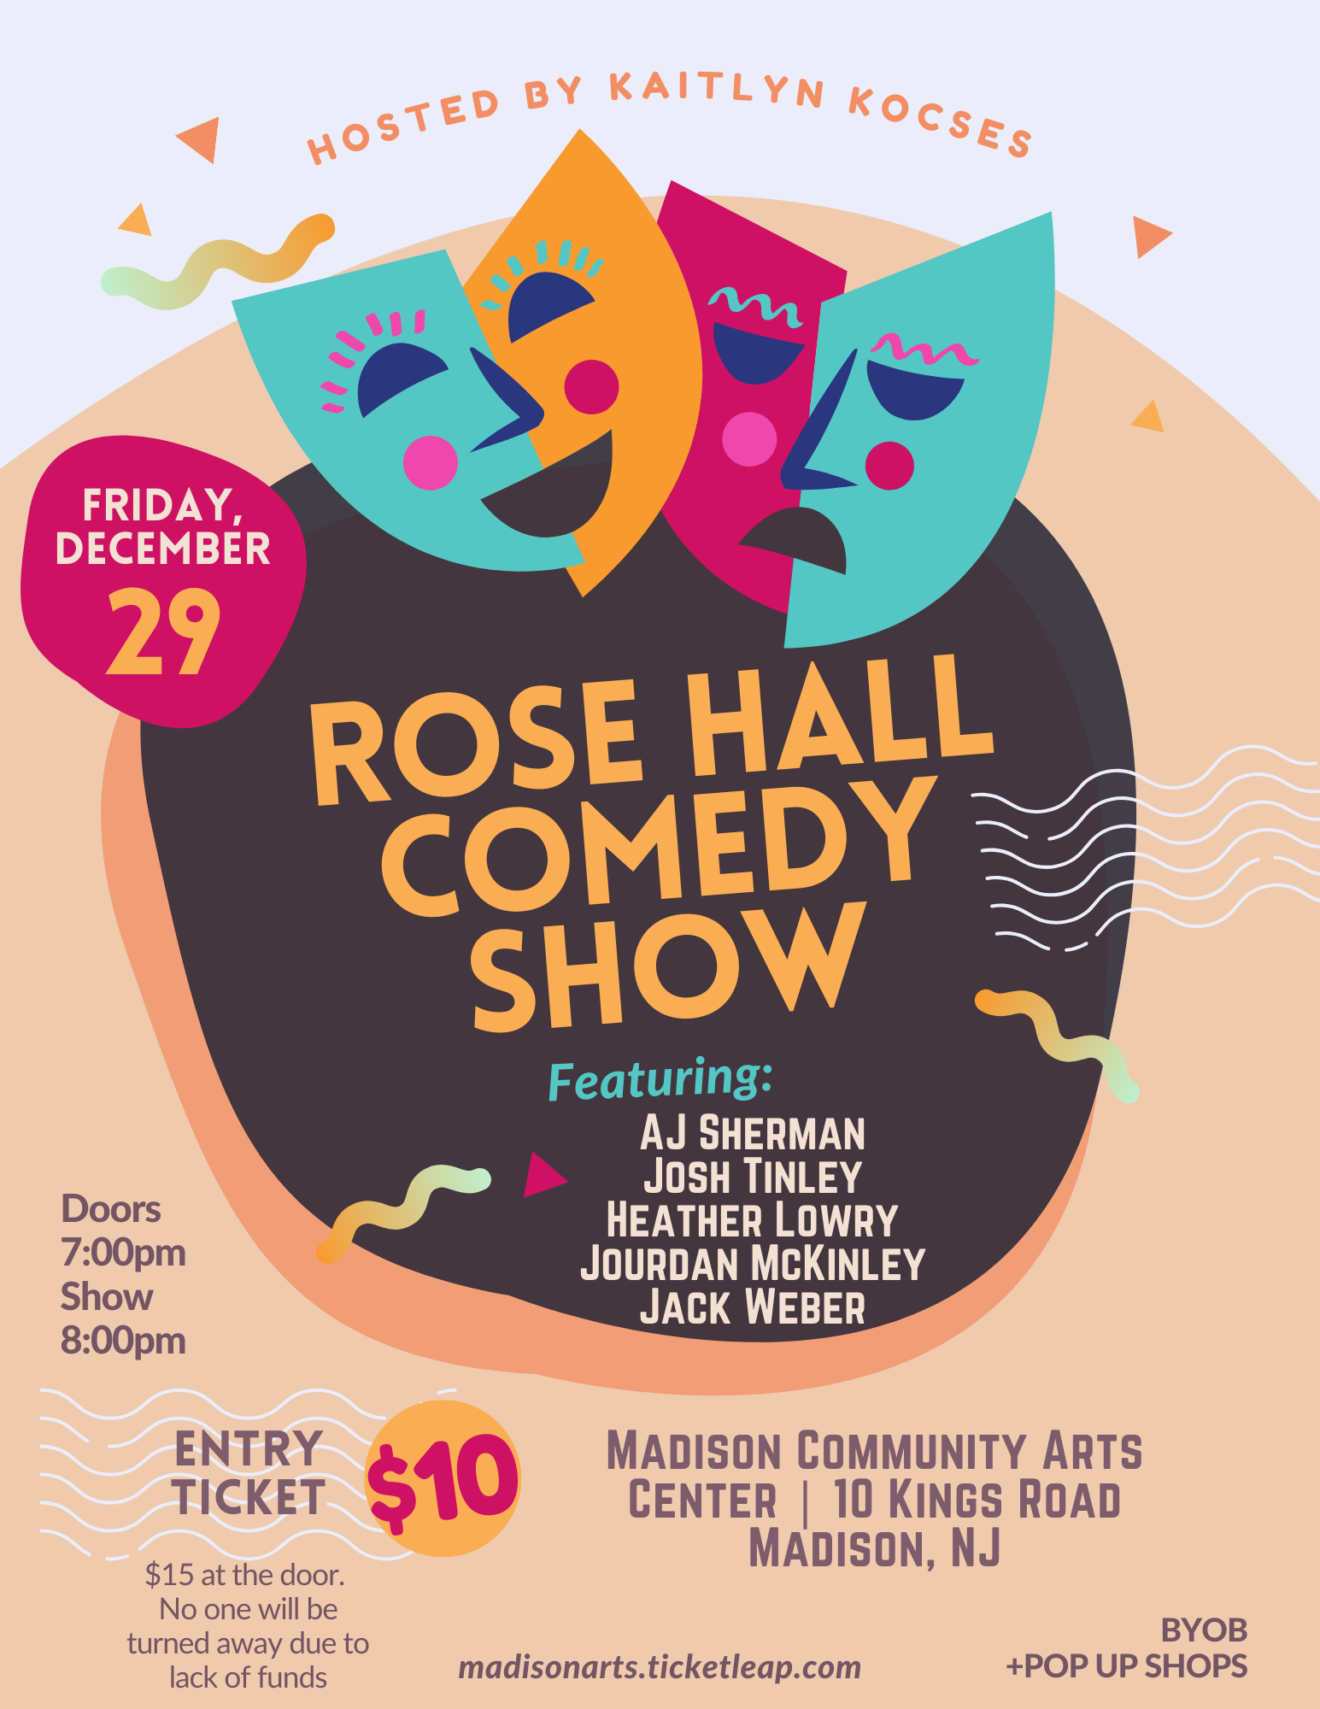 Rose Hall Comedy Show & Pop-Up Shops | Friday December 29 | 7:00 pm Doors Open | 8:00 pm Show